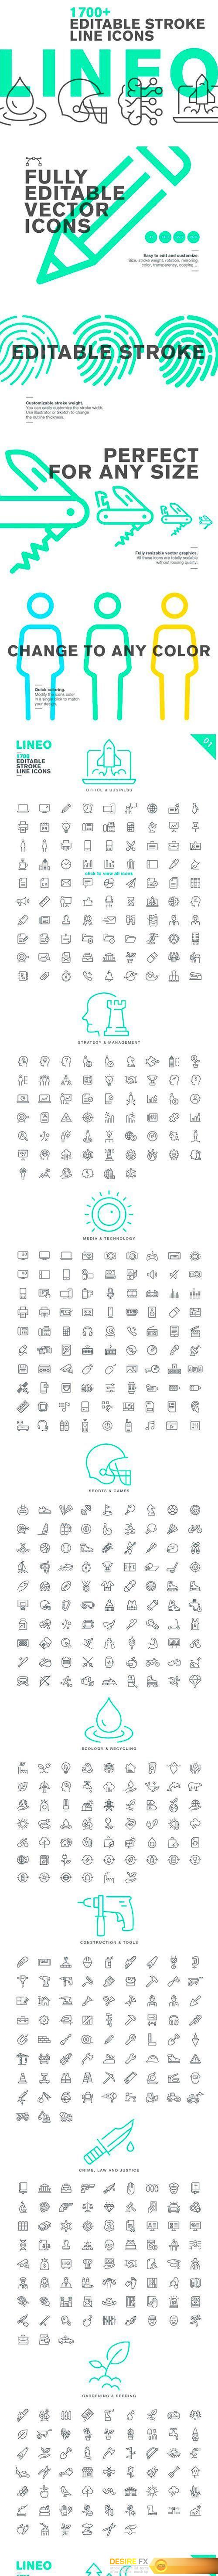 CM - LINEO - 1700+ fully editable icons 2517764